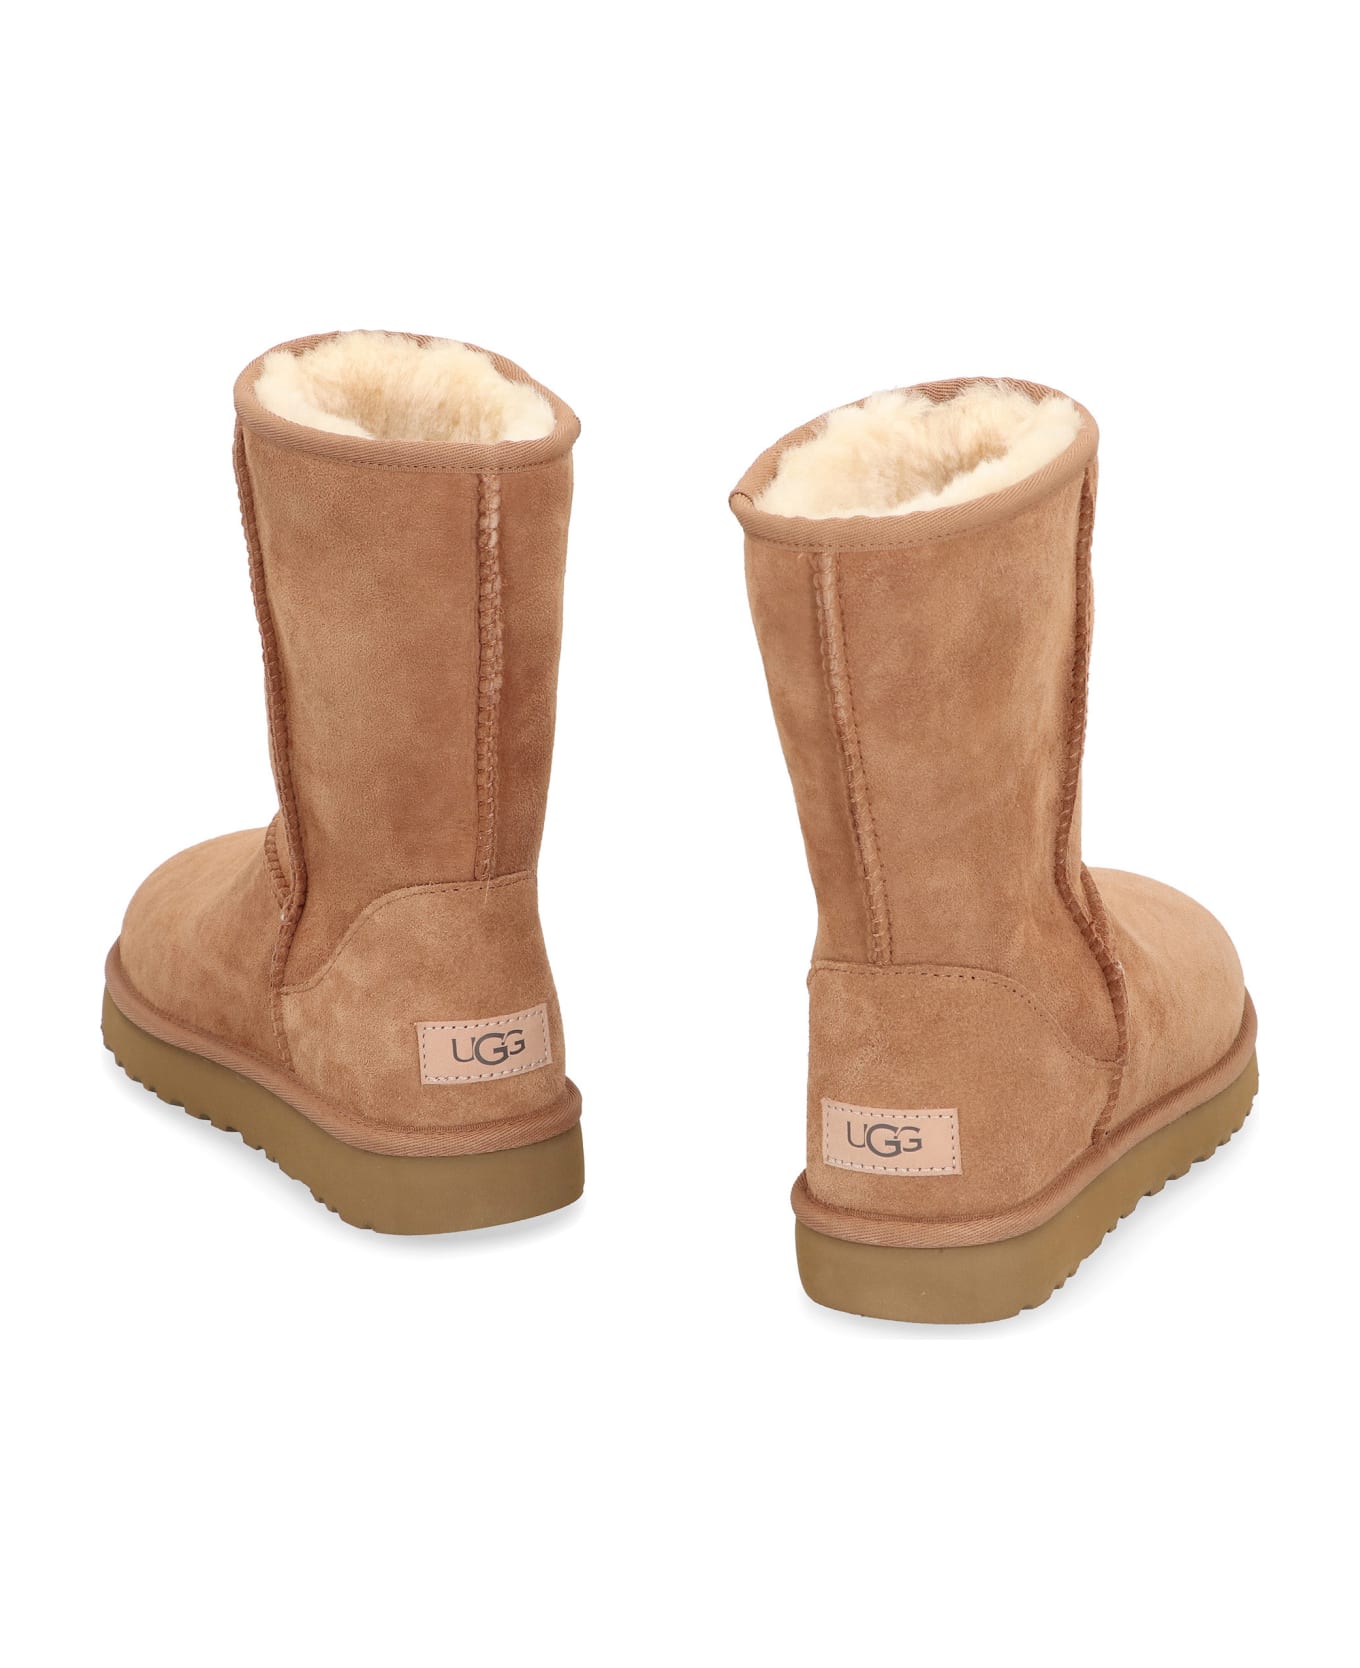 UGG Classic Short Ii Ankle Boots - CHESTNUT